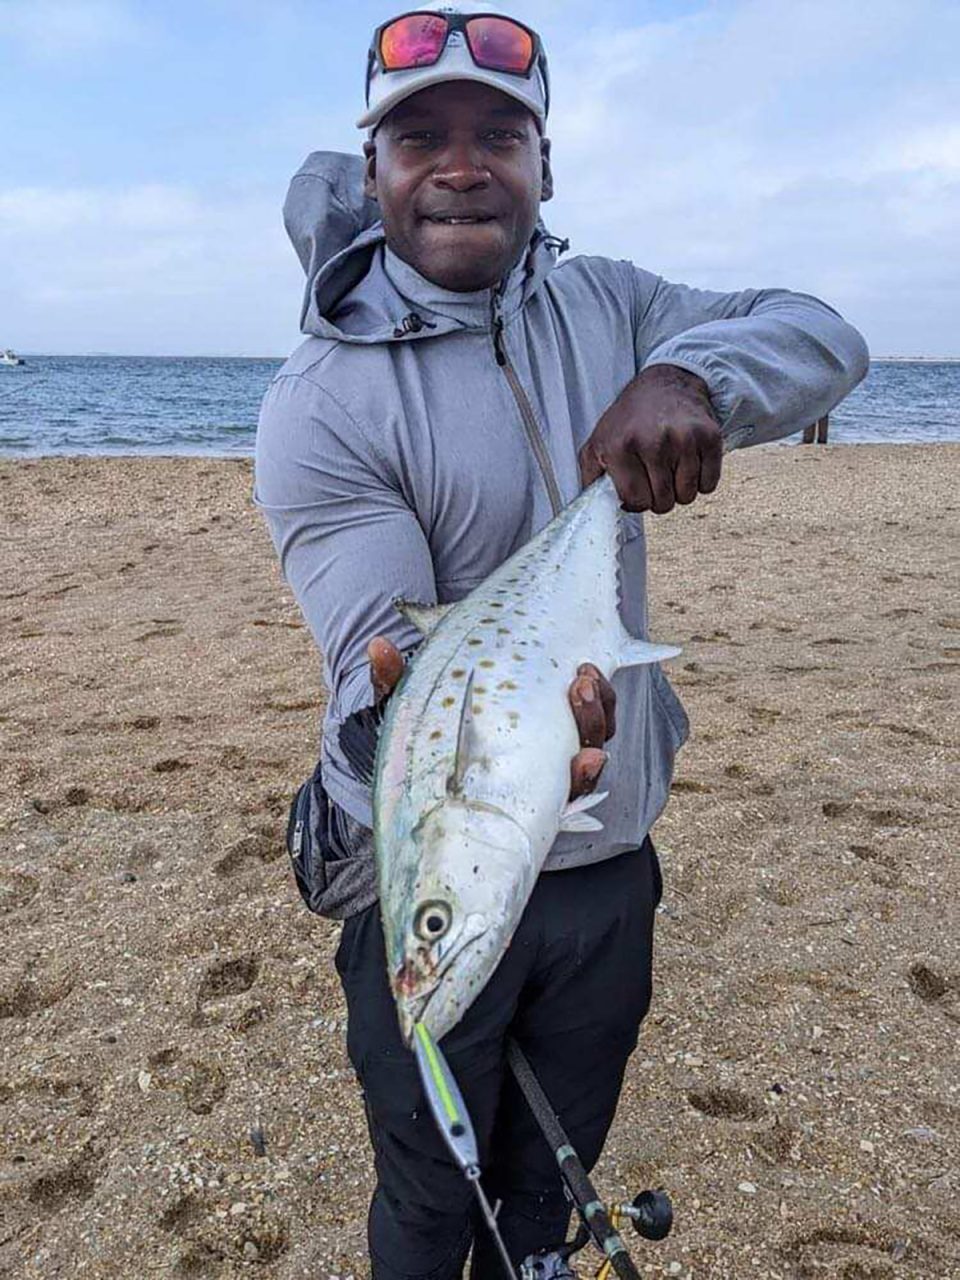 Tim Still of Havelock shows off a nice-sized Spanish mackerel -- a real treat when caught on the beach. Photo: Contributed